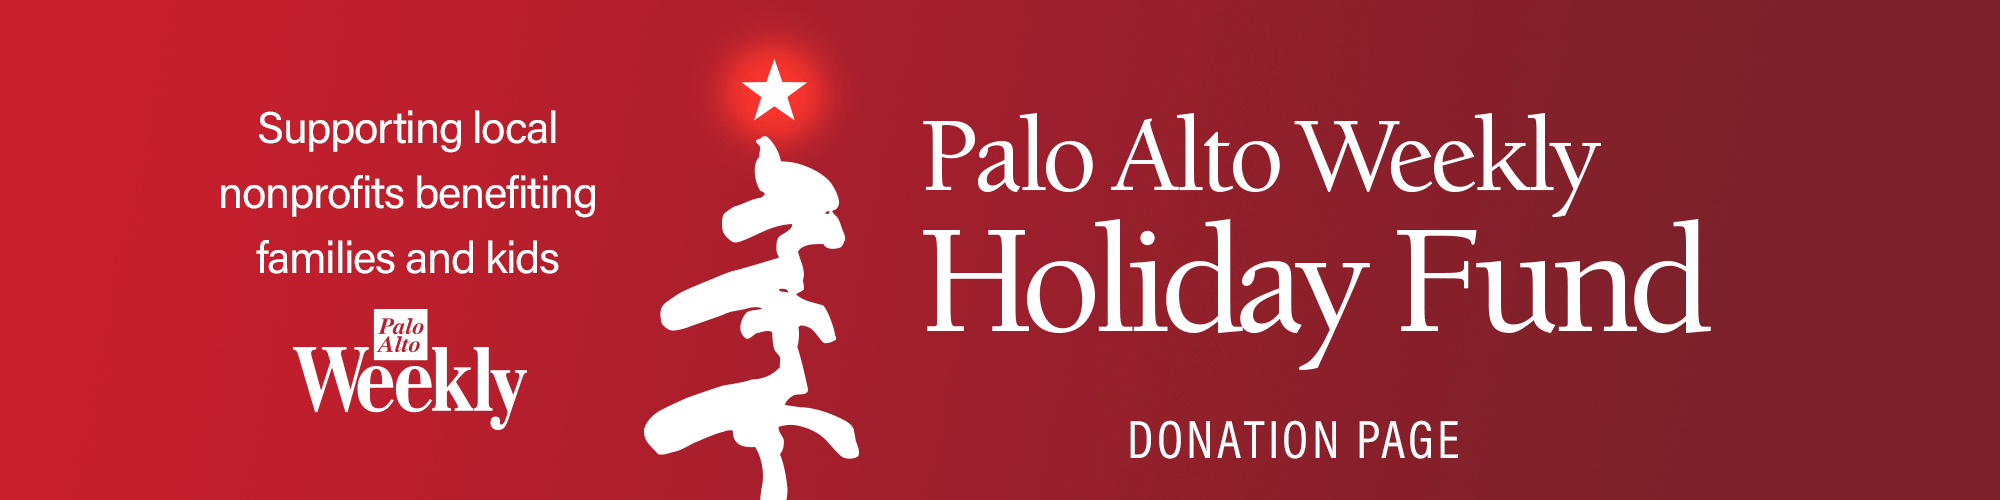 Holiday Fund Donation Page - 